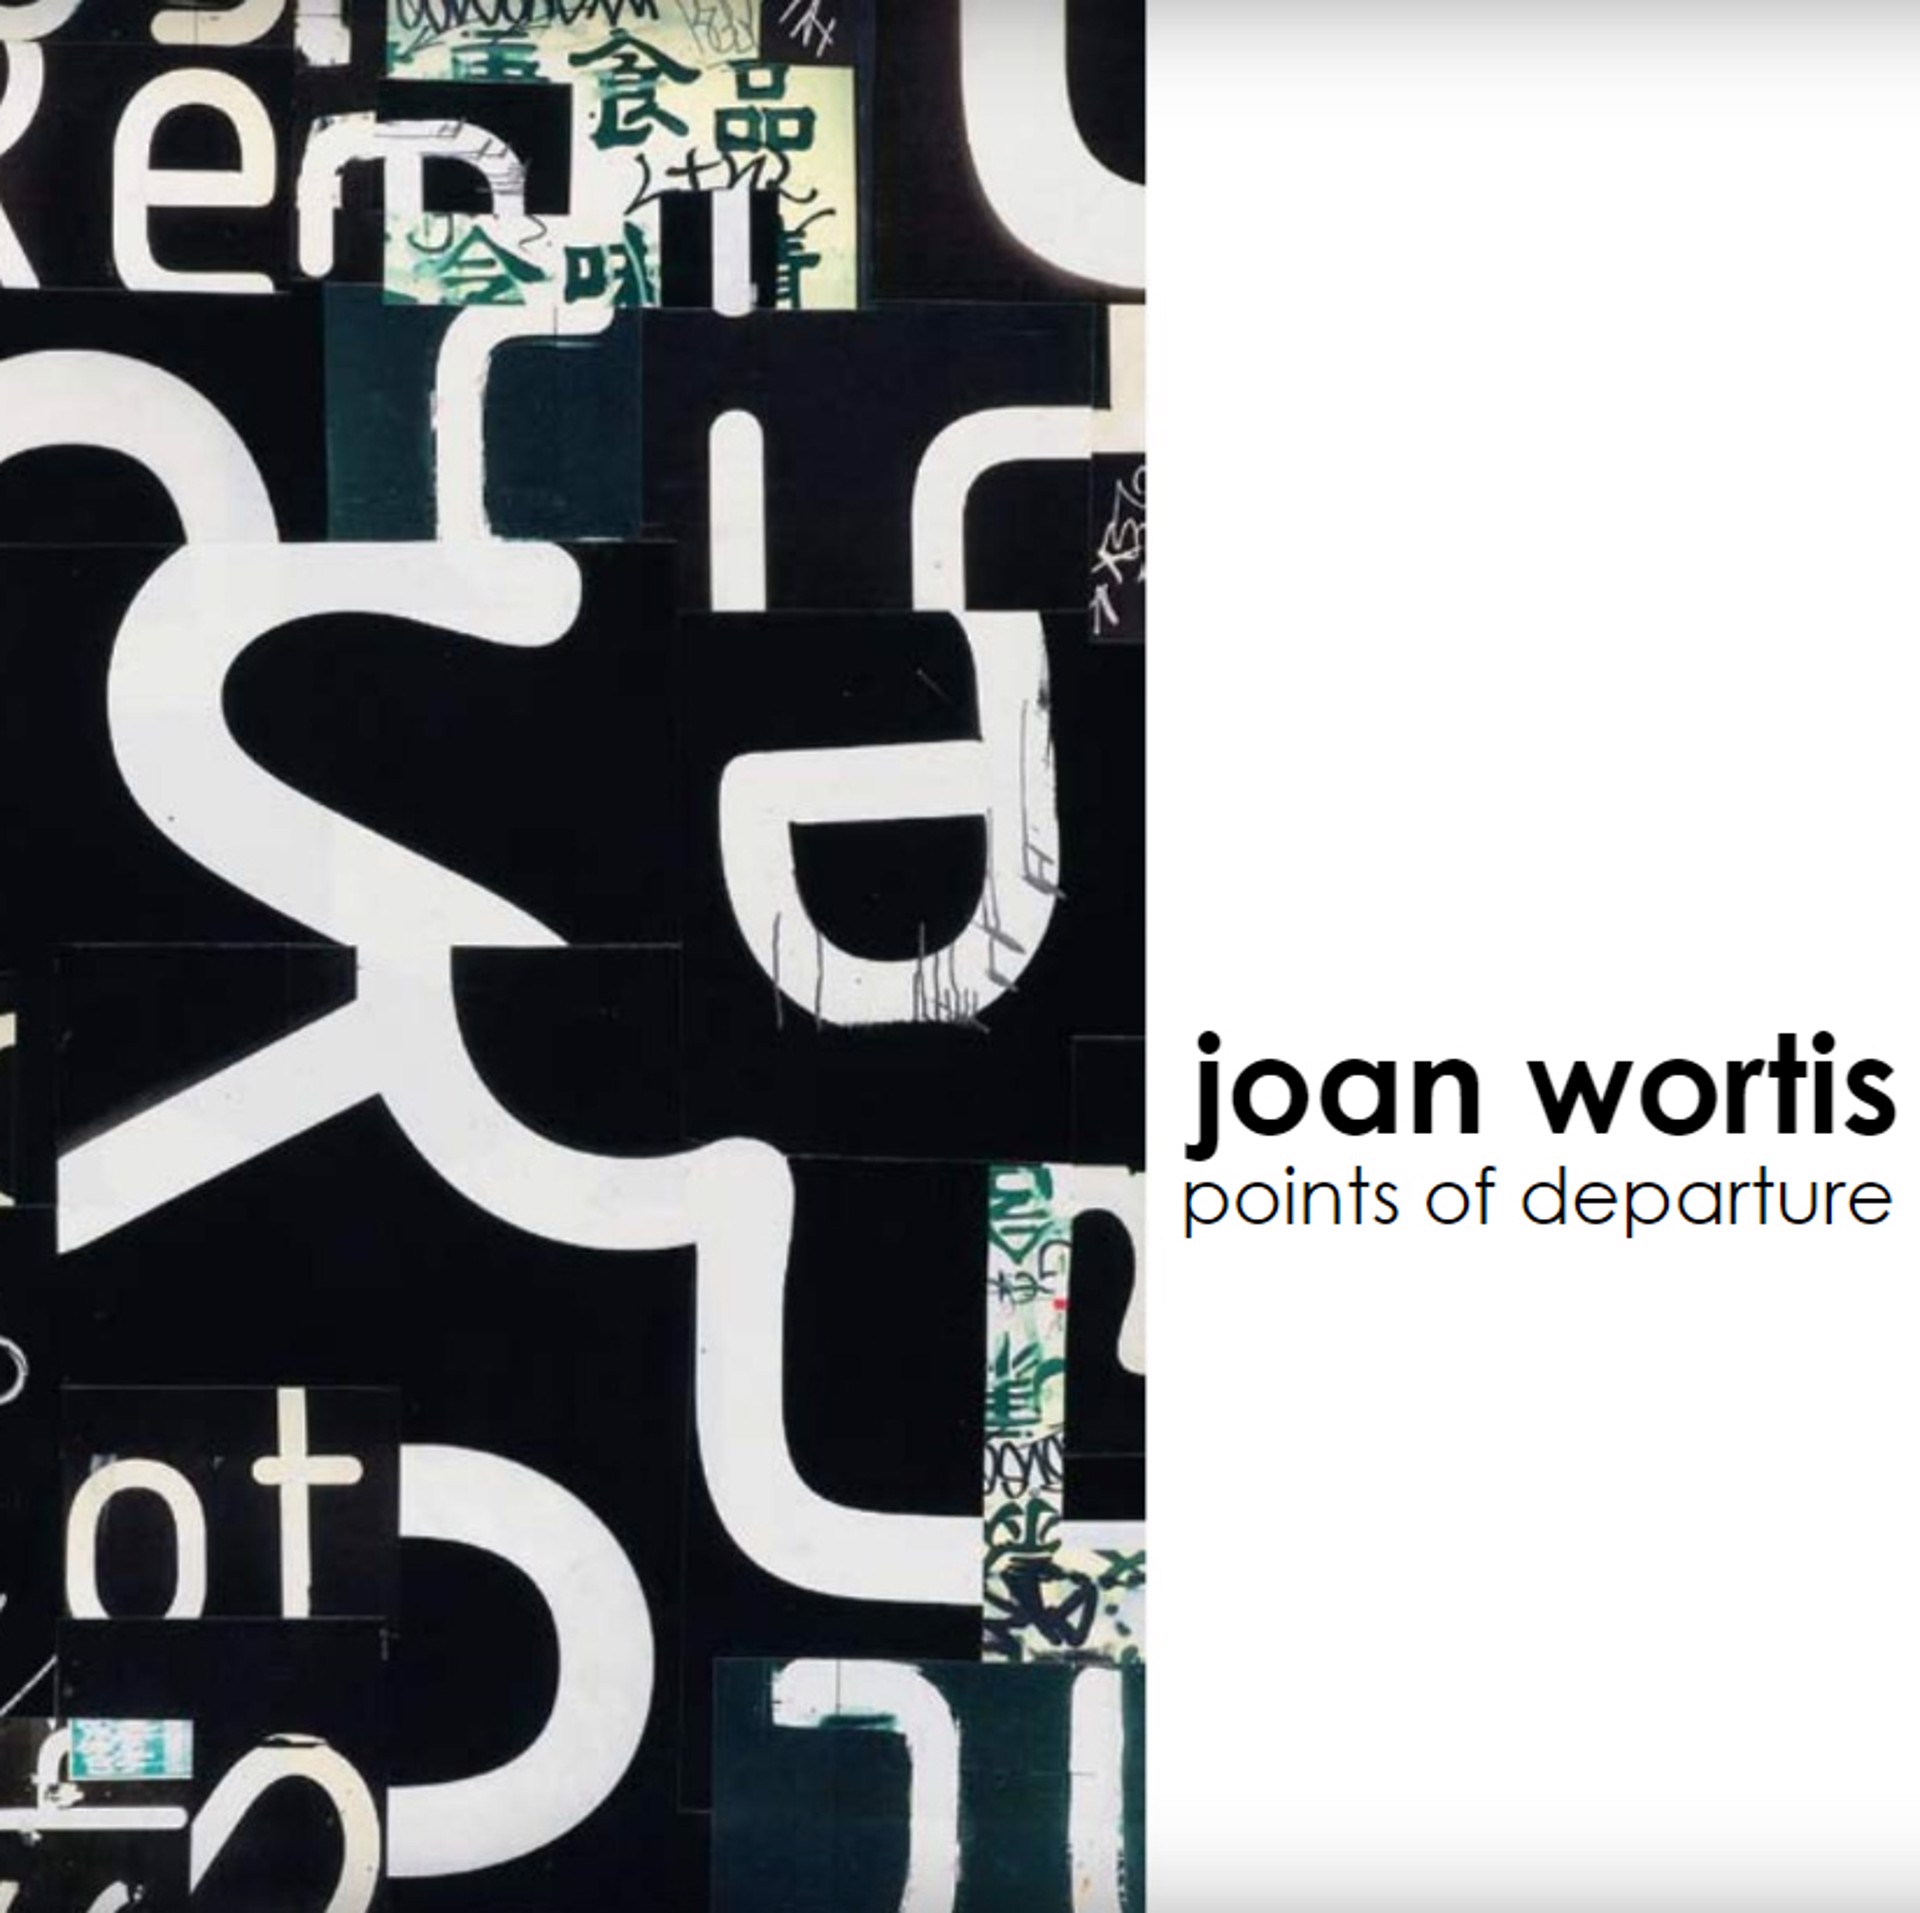 Points of Departure | exhibition catalog by Joan Wortis